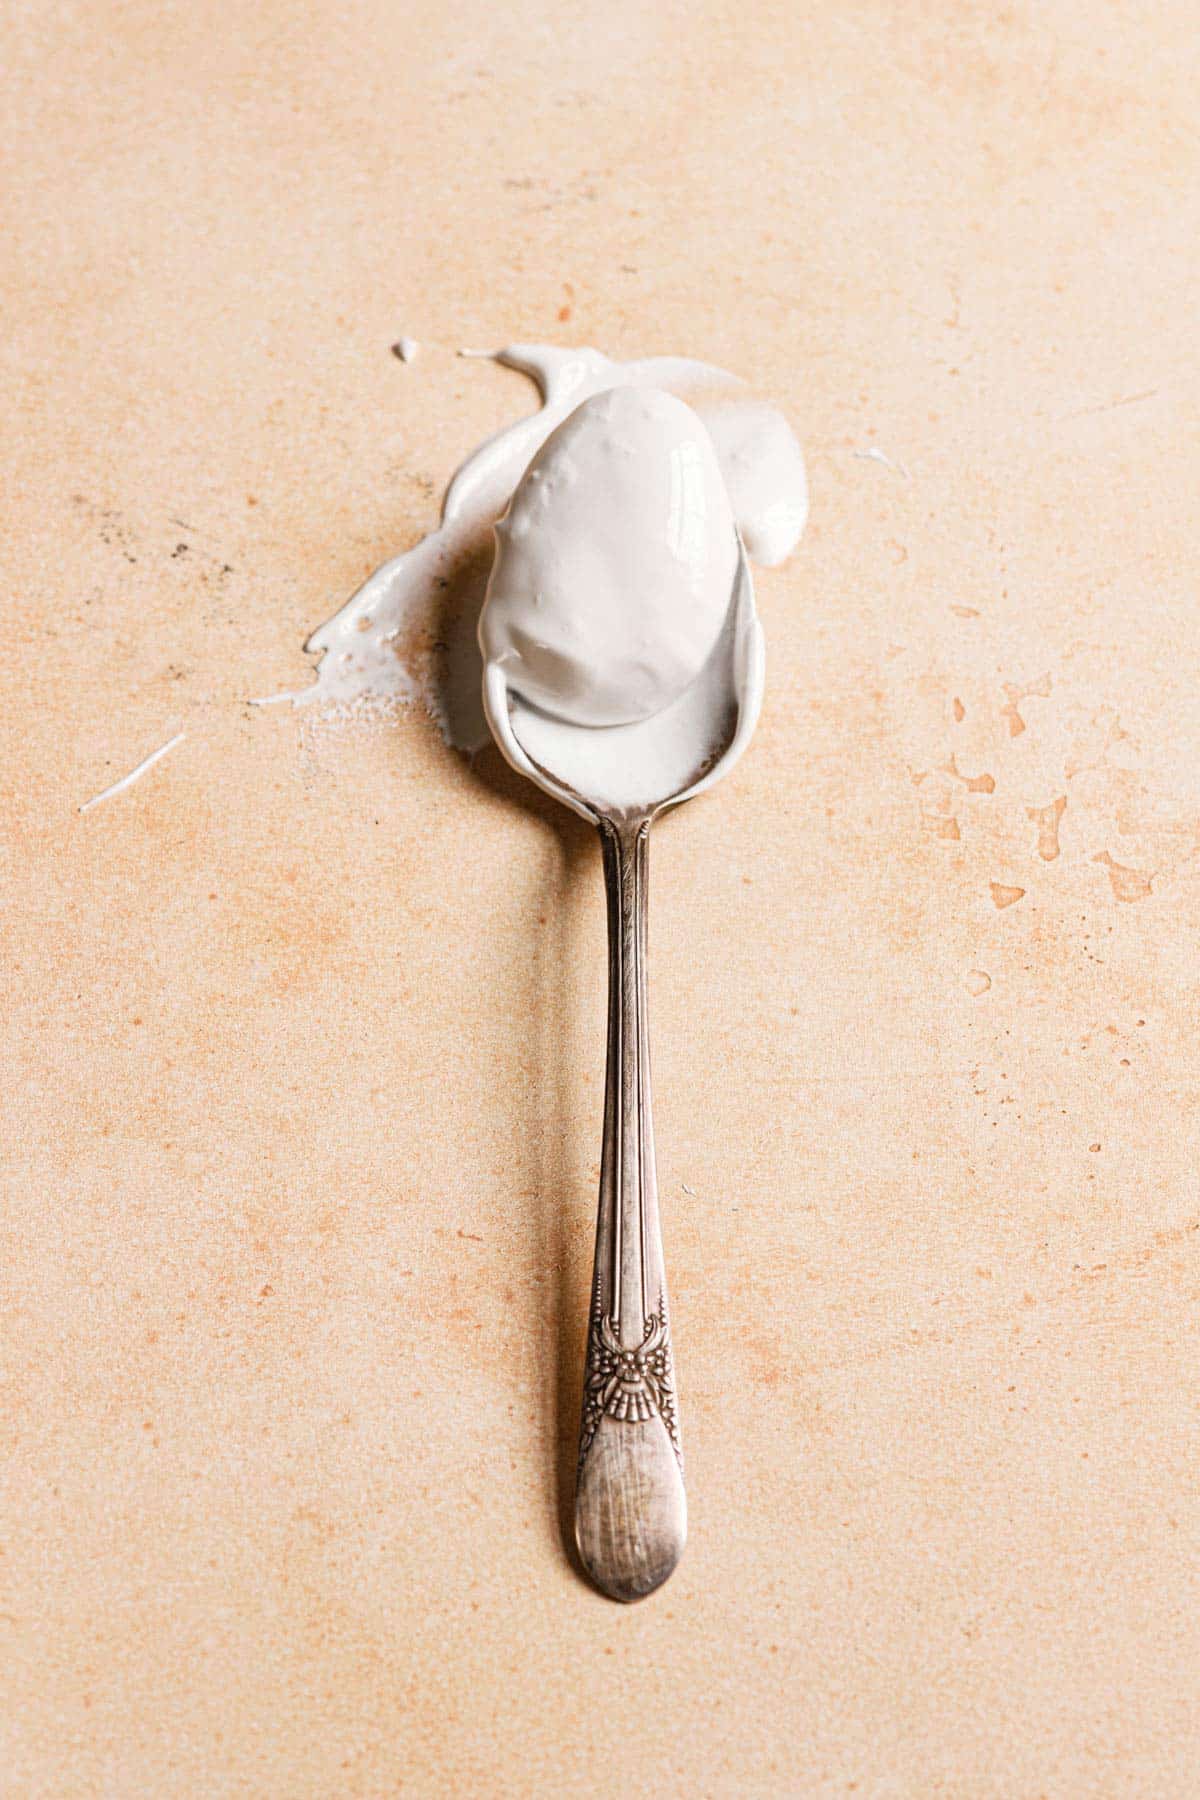 A silver spoon that has been dipped into marshmallow cream on a peach counter.